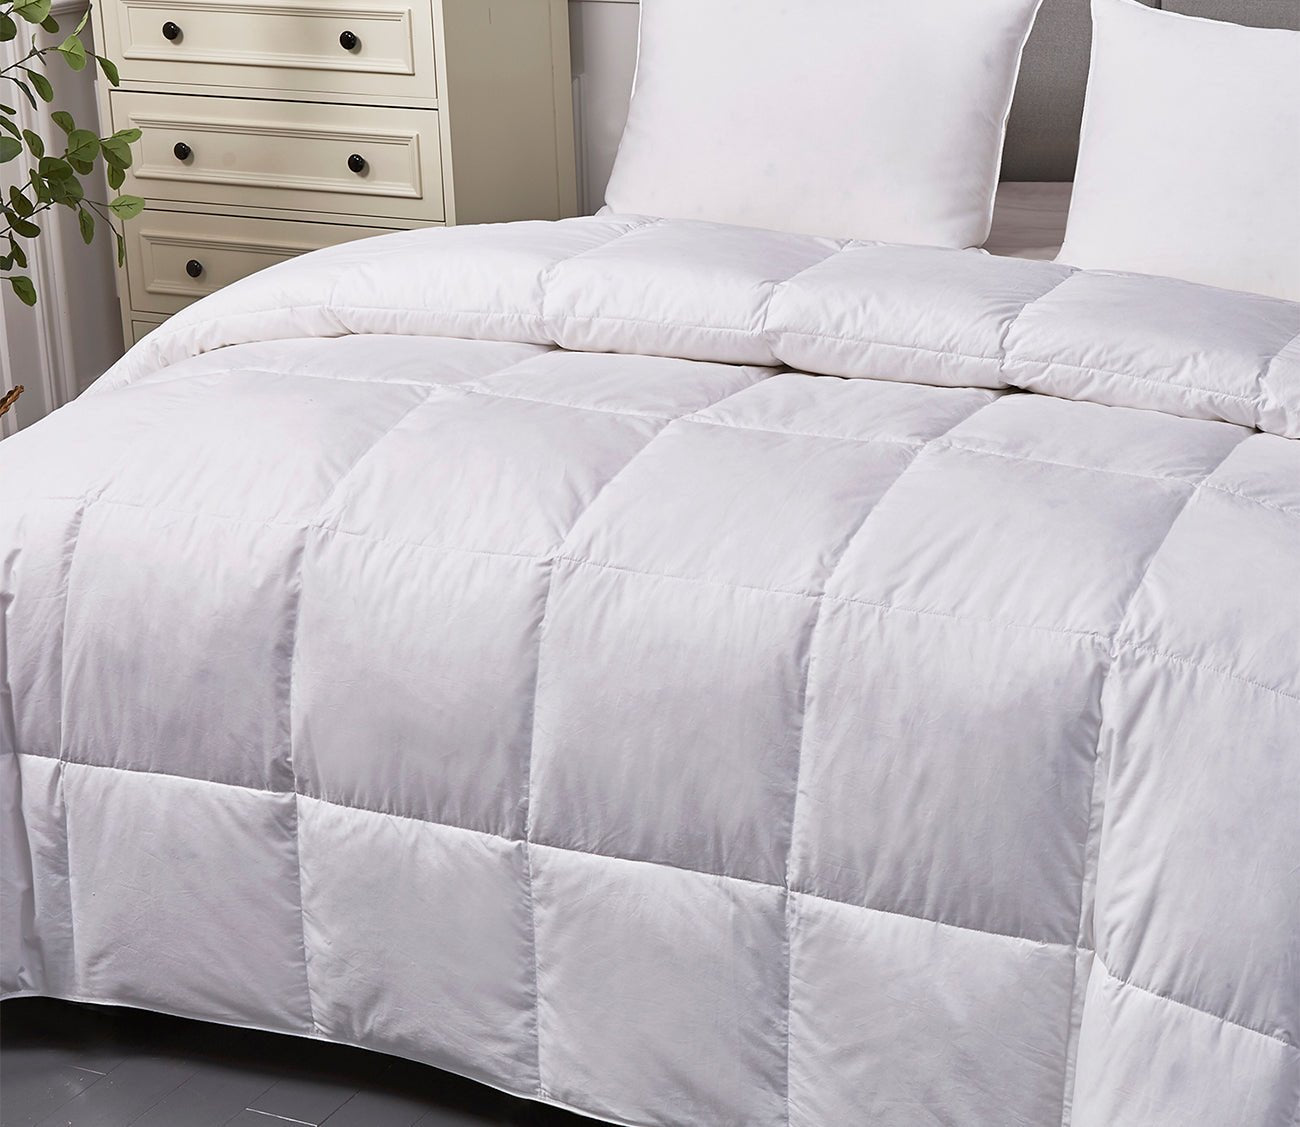 Naples Hungarian White Goose Down Comforter by Blue Ridge Home Fashions